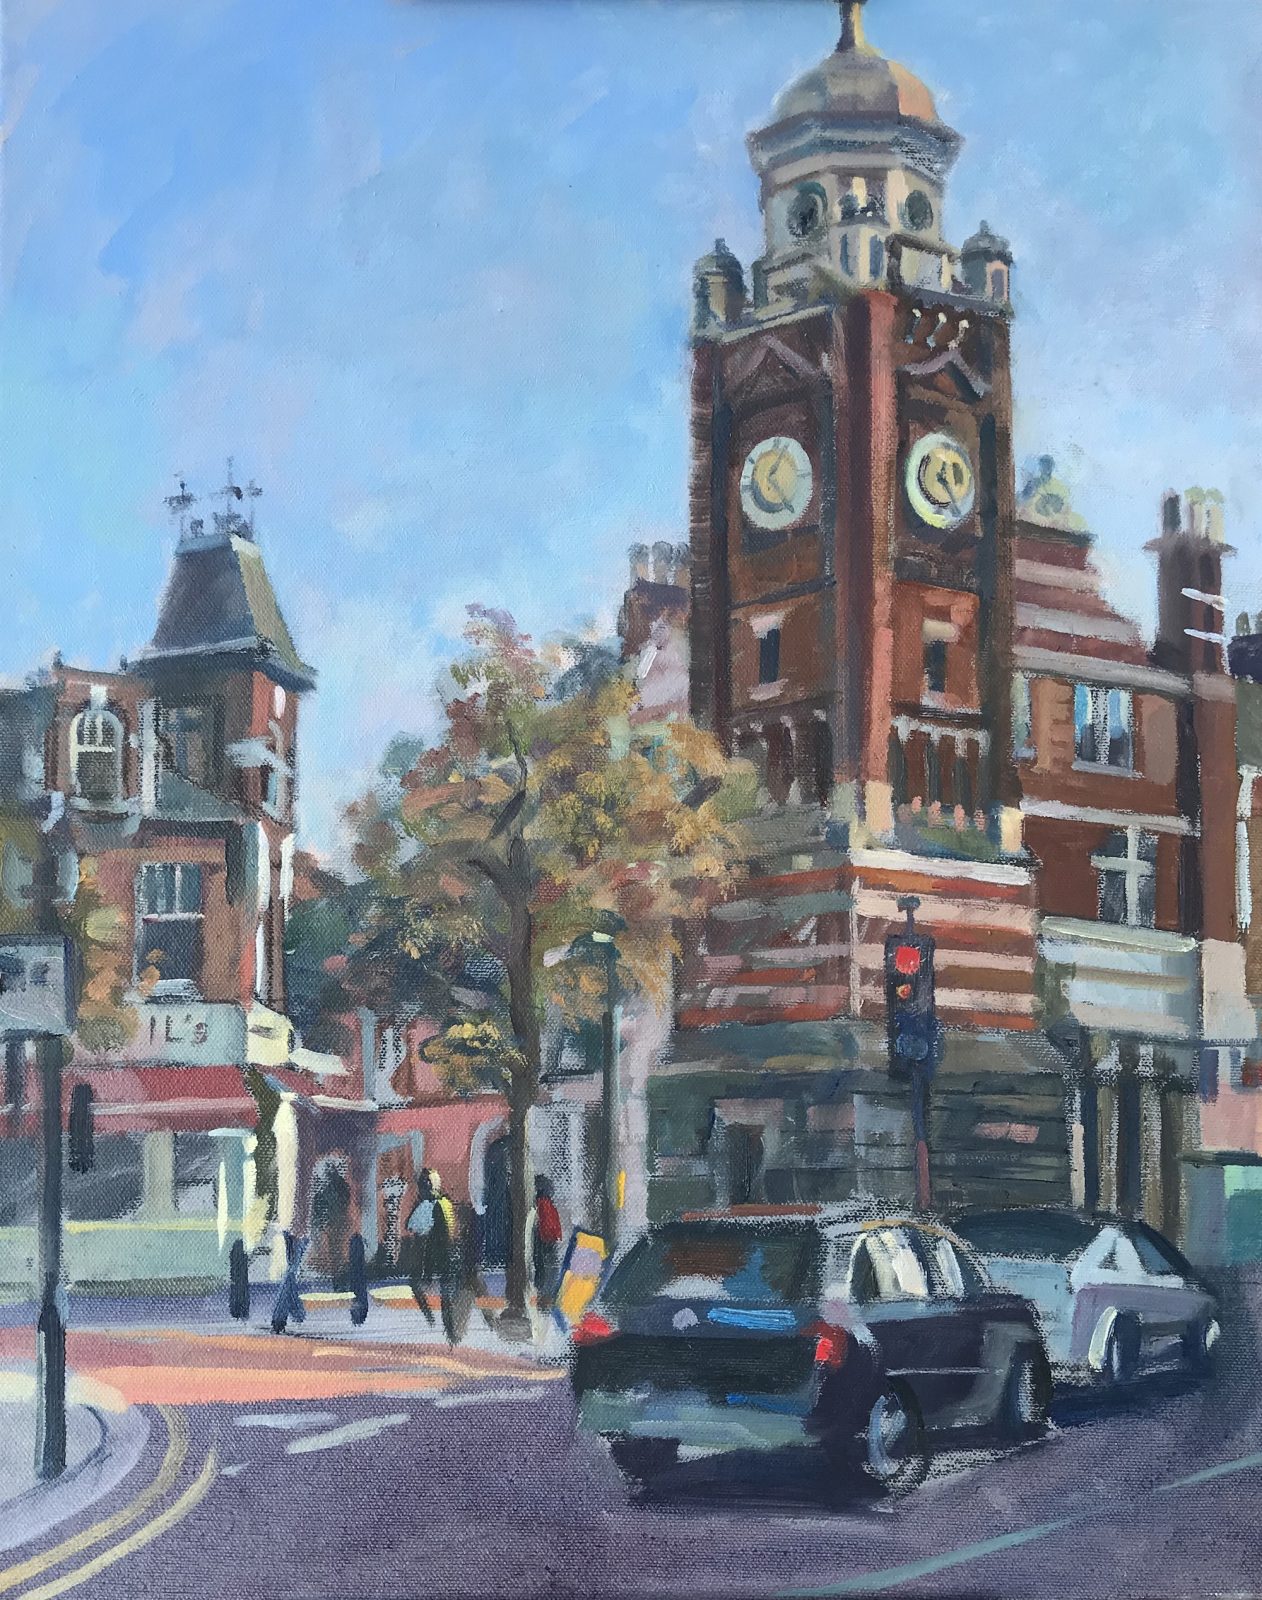 The Clock Tower, Crouch End 16 x 20 Available as a print